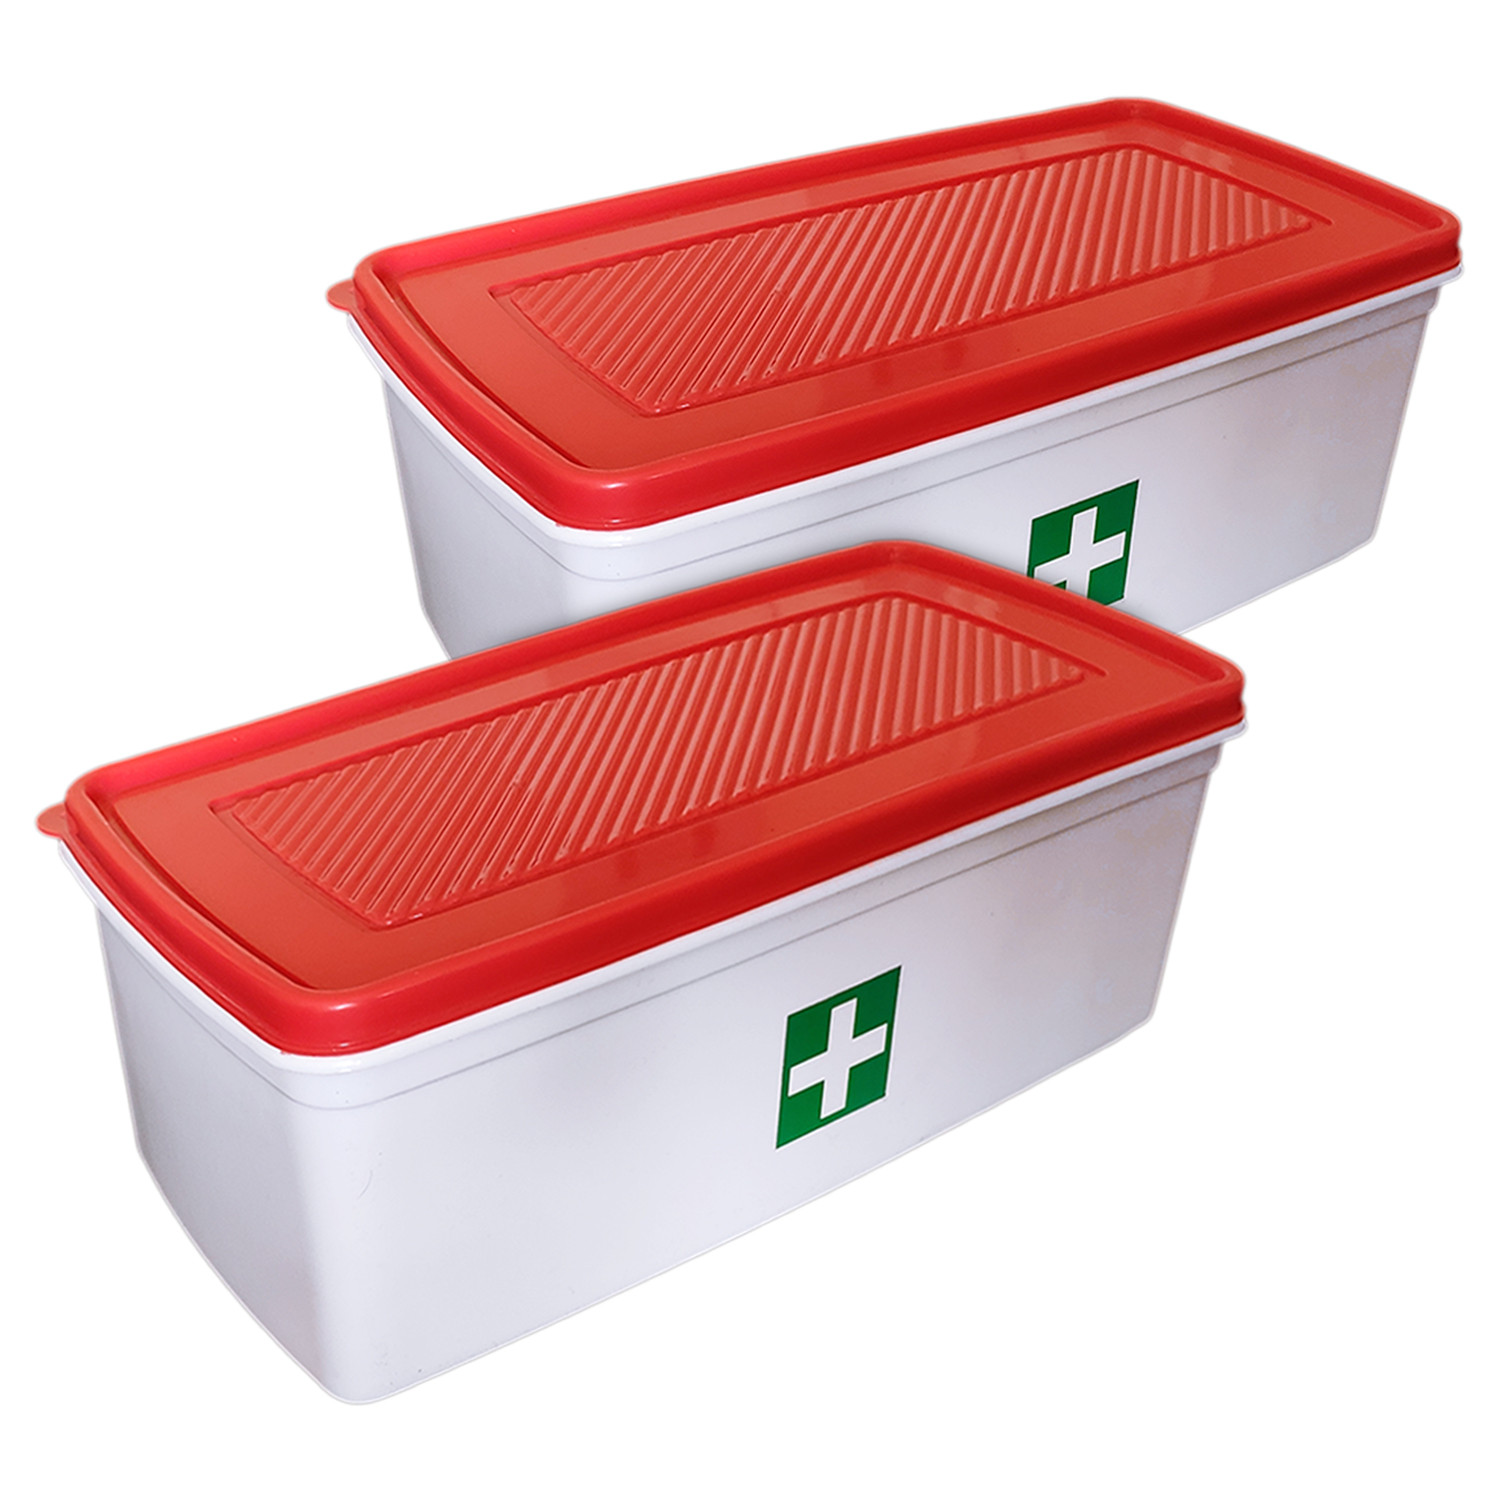 Kuber Industries Multiuses Plastic Medicine/First Aid Box (Red & White)